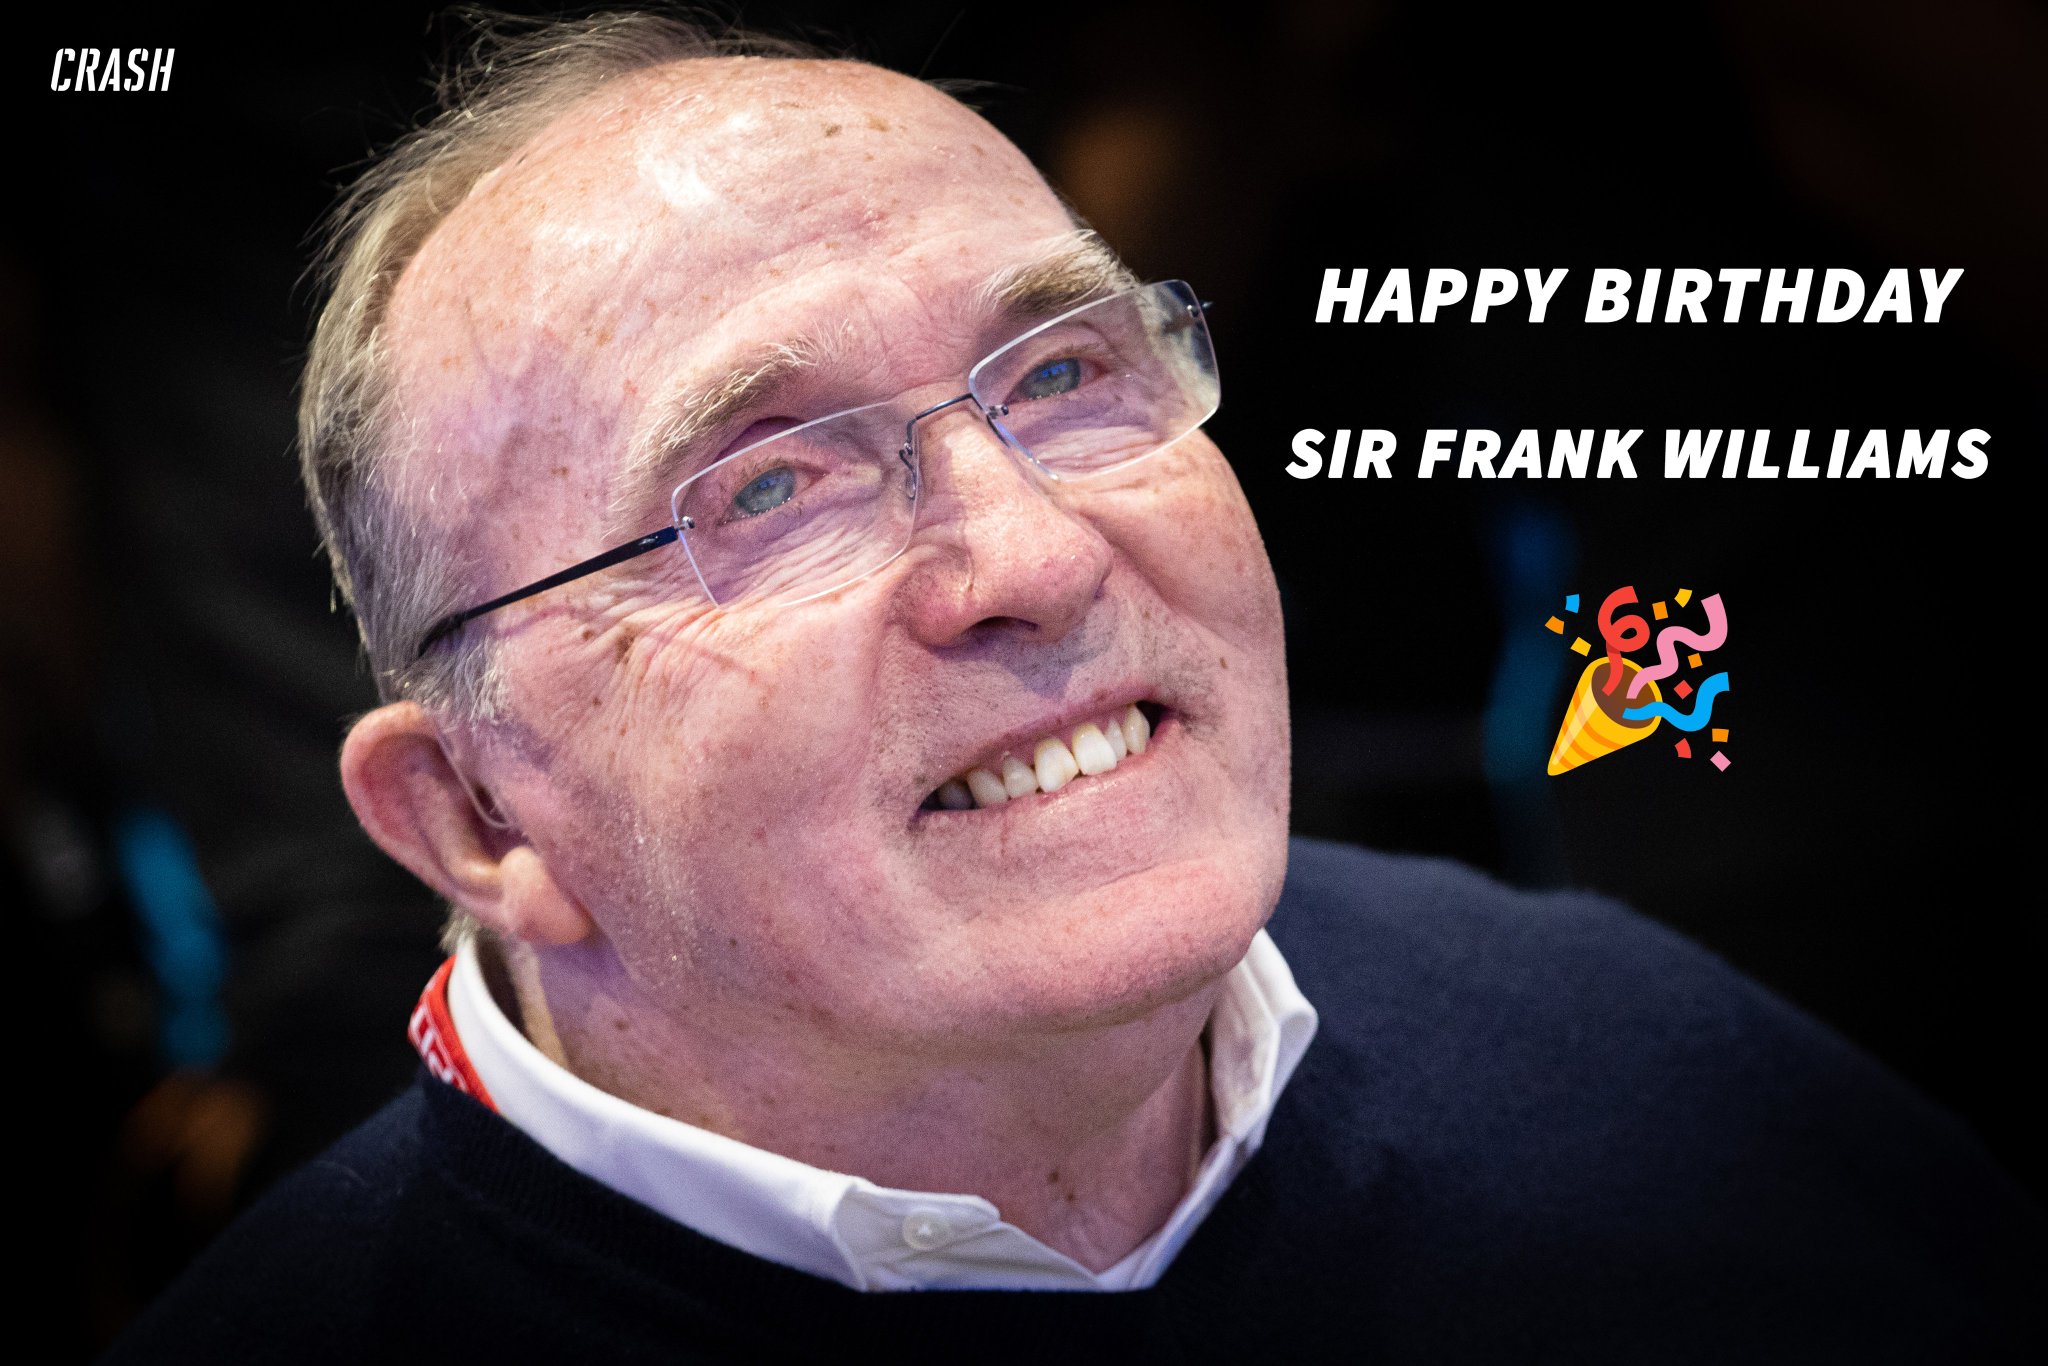 A very Happy Birthday to the legend that is, Sir Frank Williams    